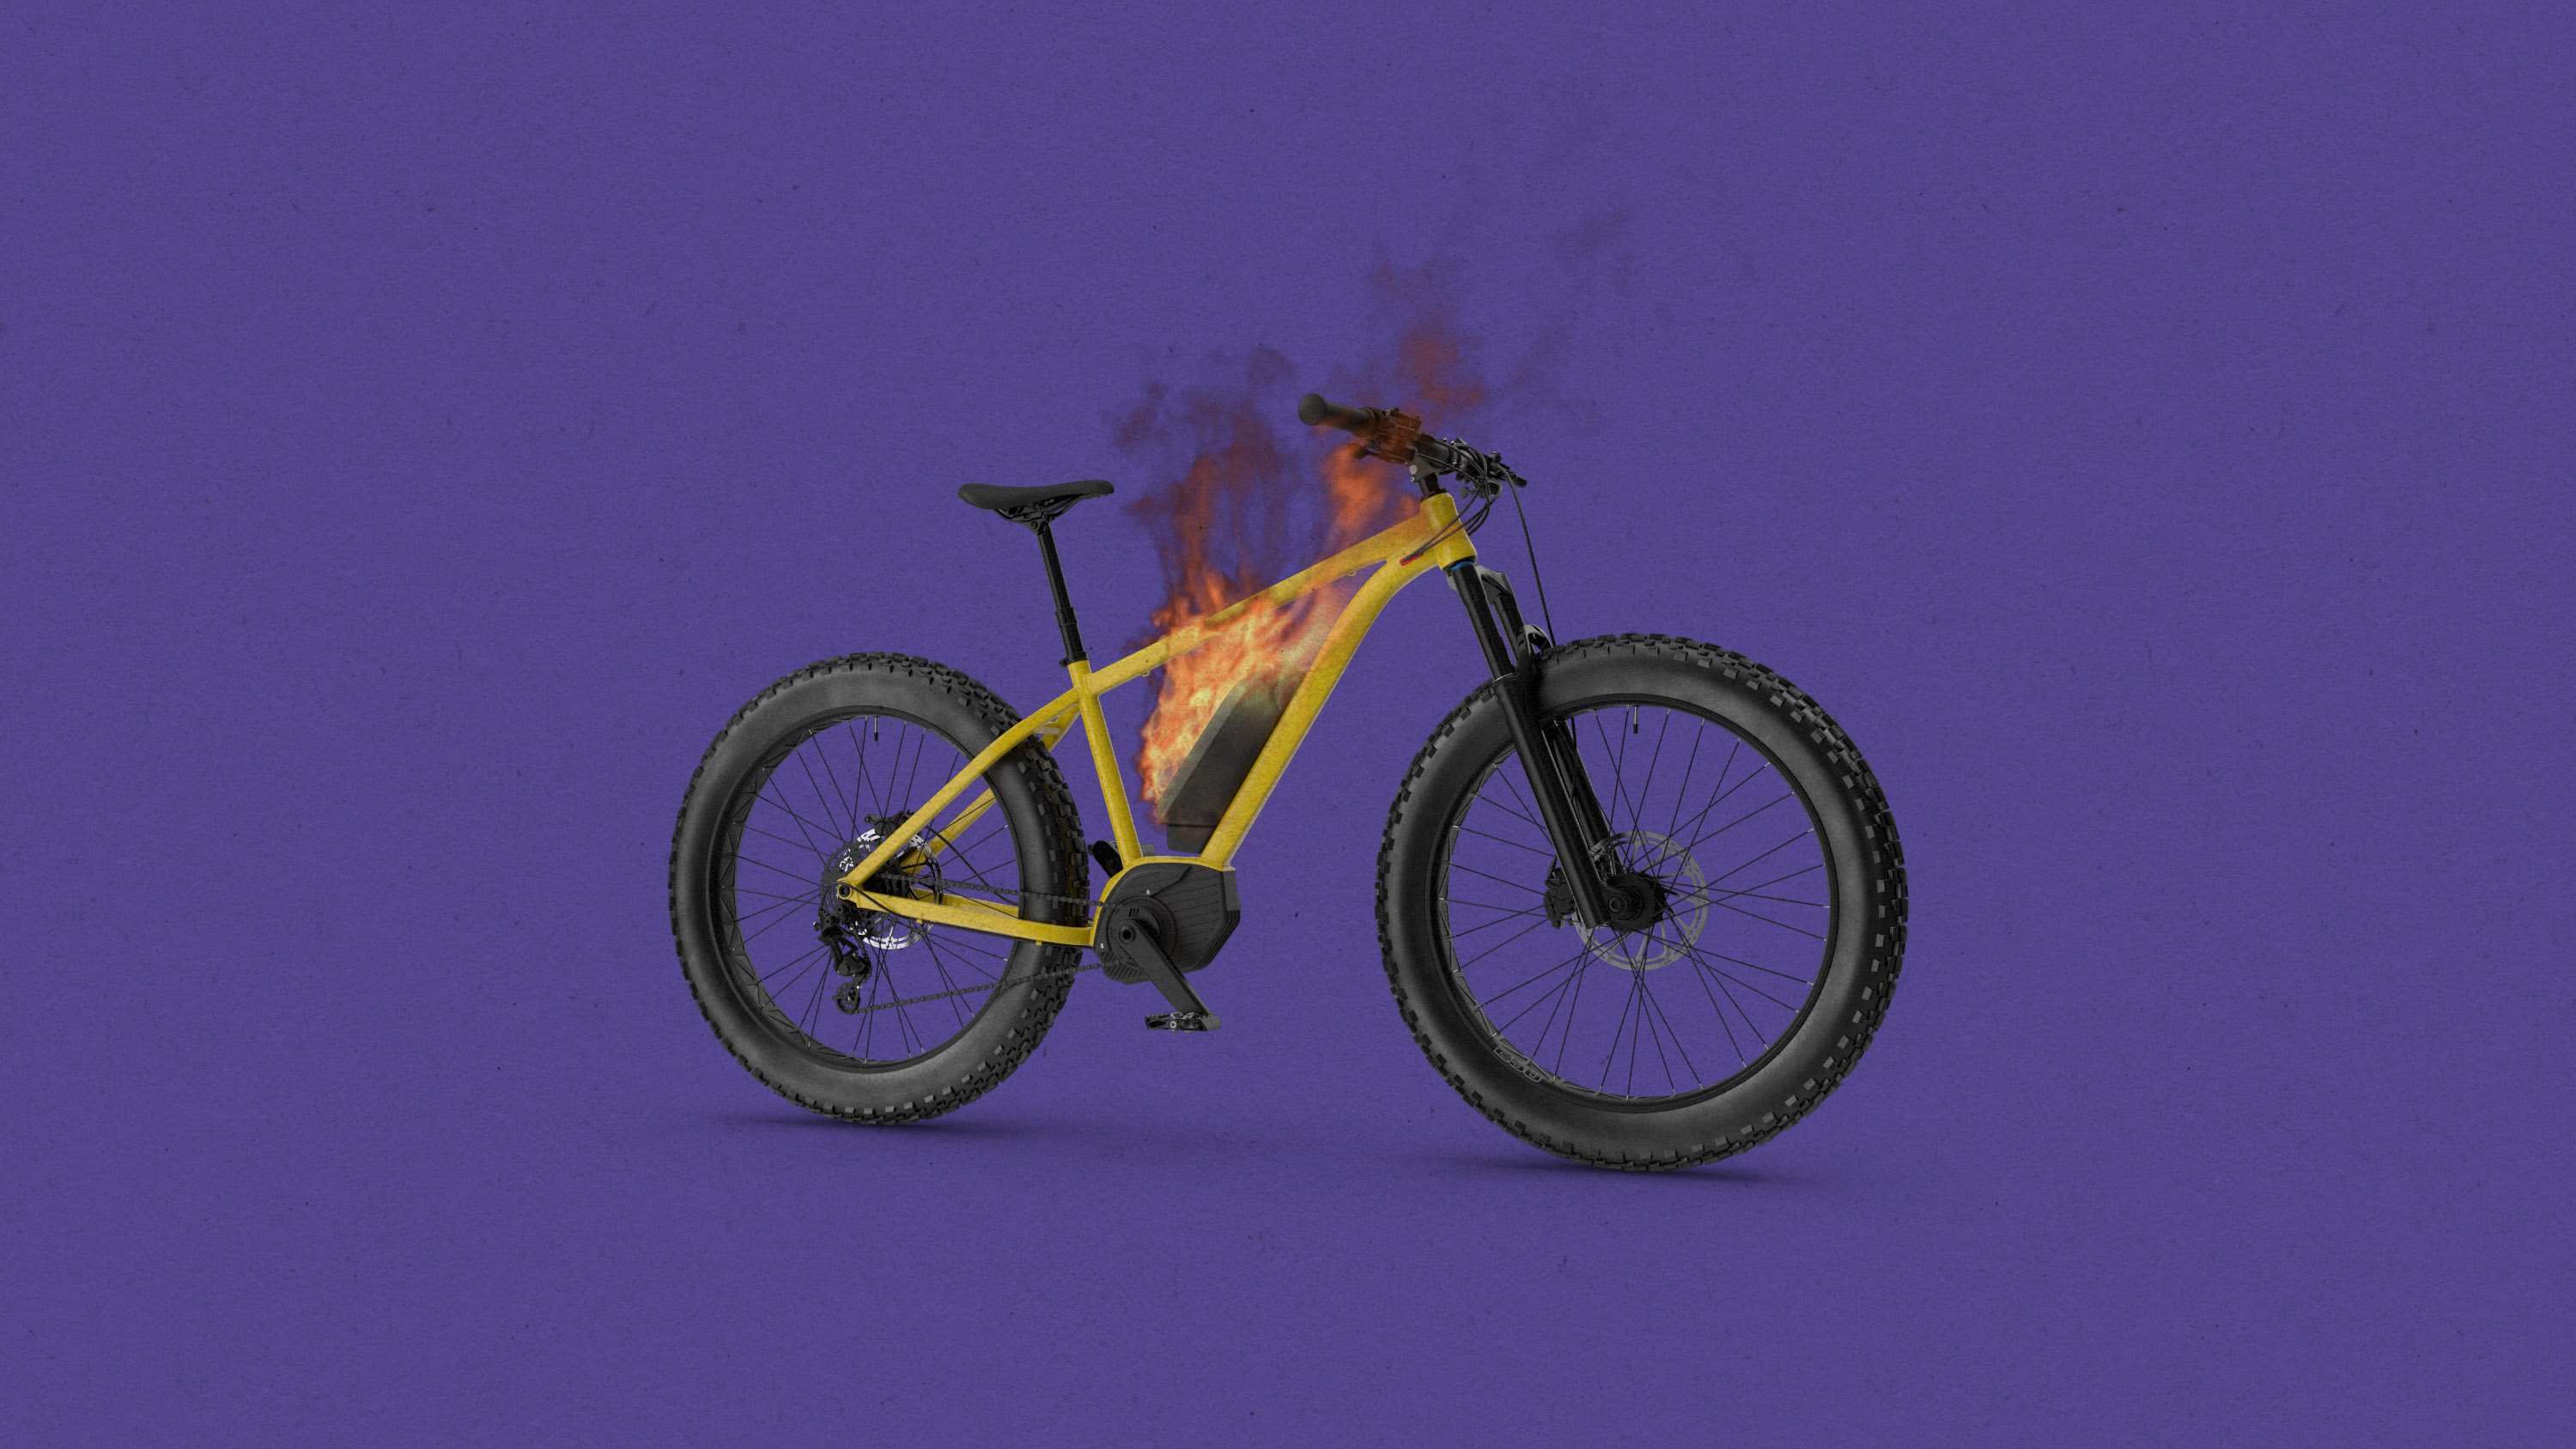 electric bicycle with fire coming from its battery